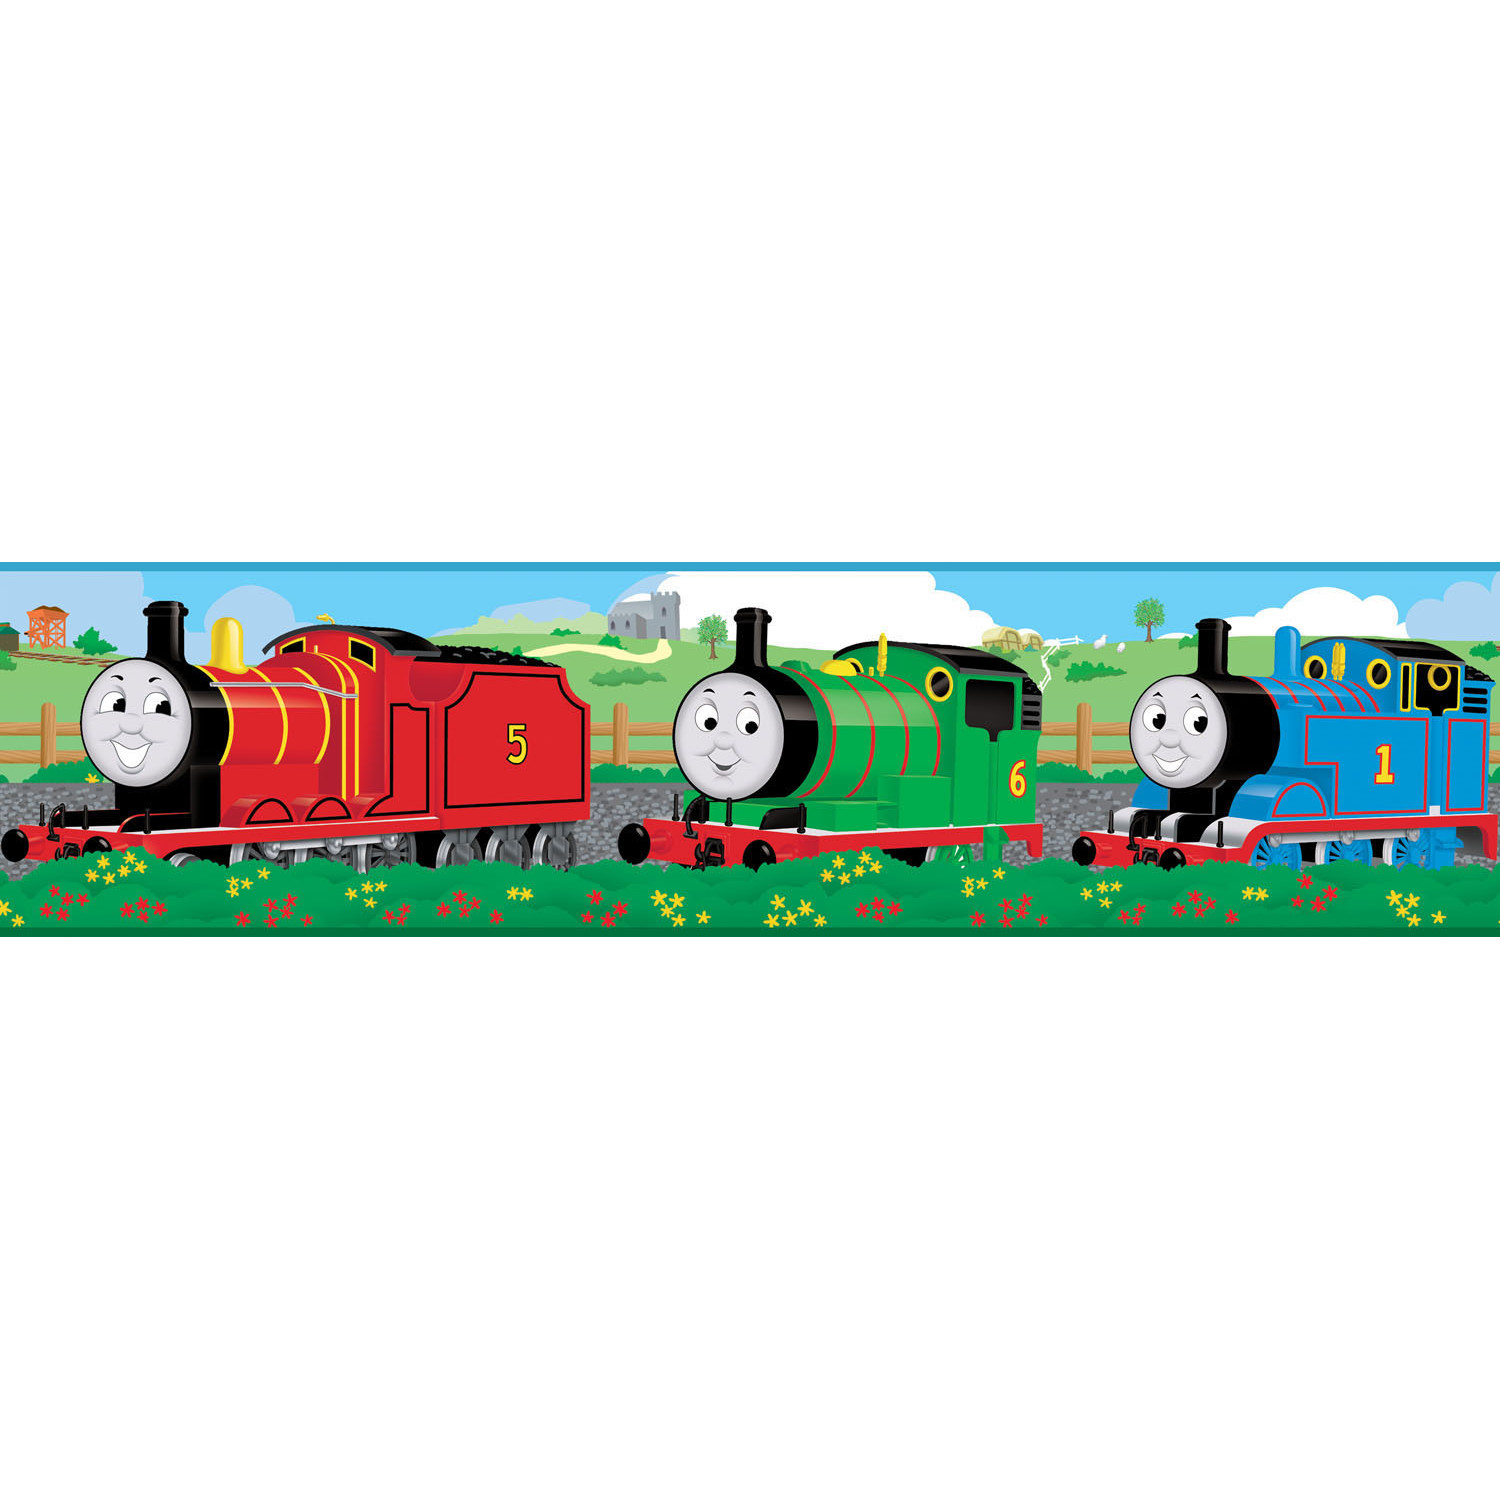 Room Mates Thomas and Friends 15' x 5